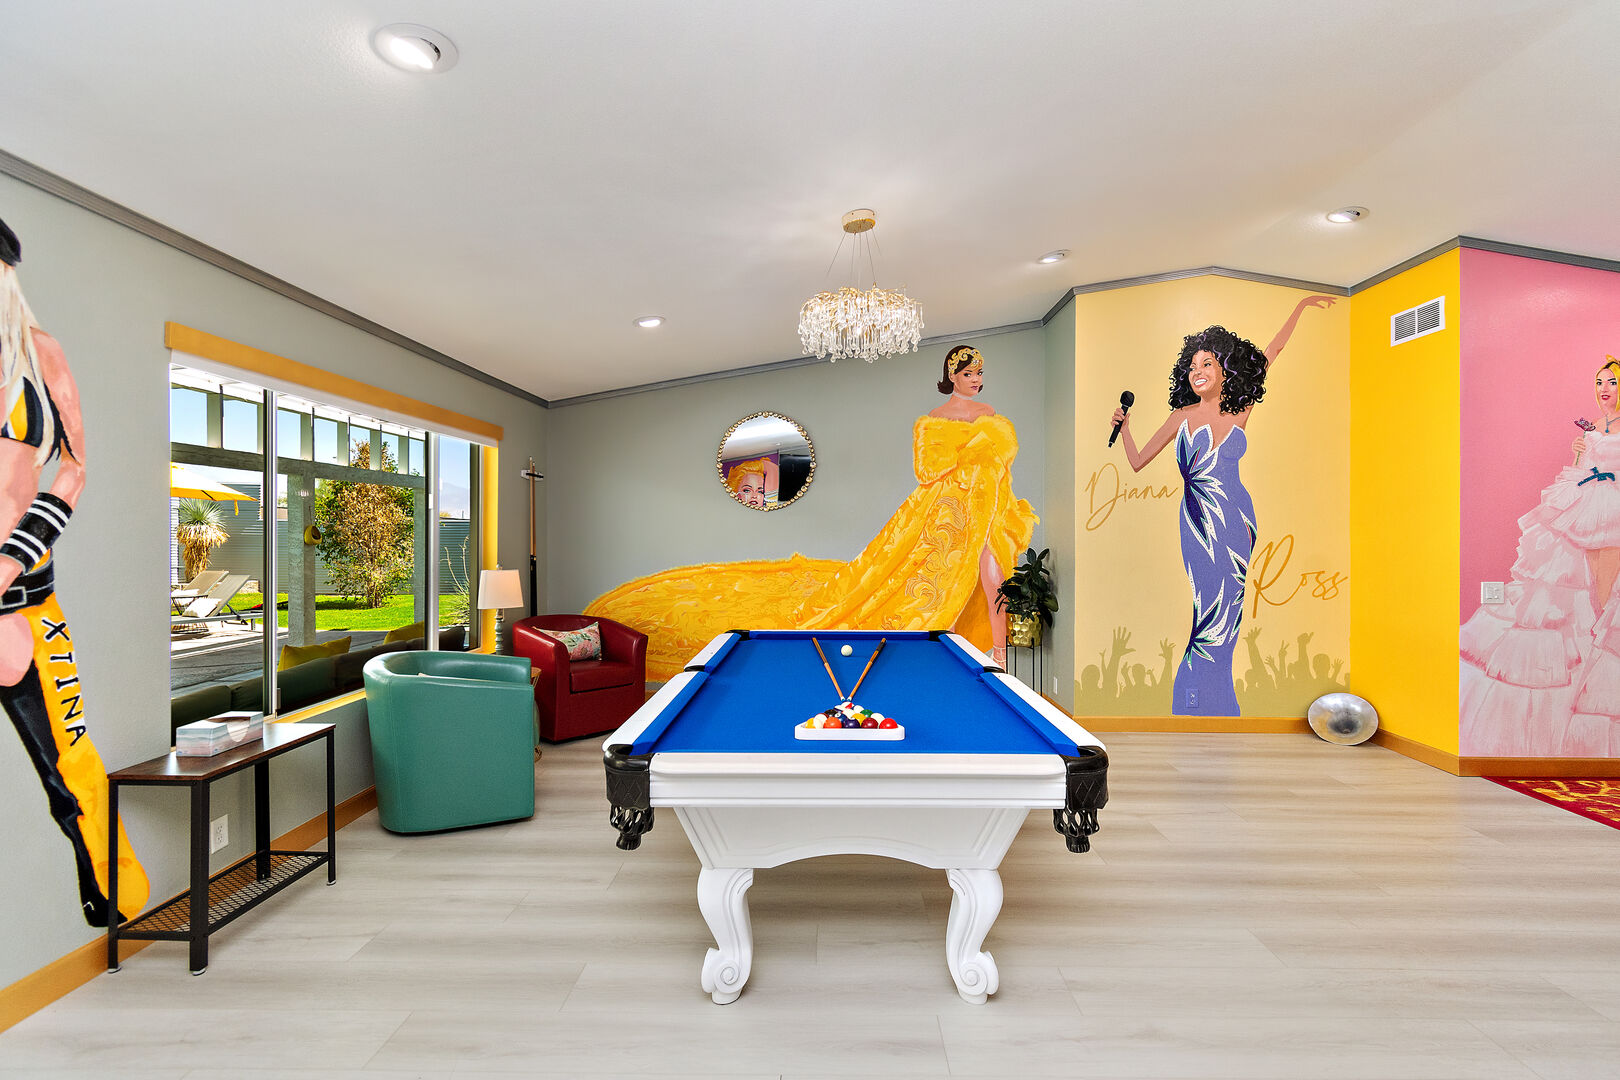 The pool table is conveniently placed next to amazing murals featuring Christina Aguilera, Rihanna, and Diana Ross.